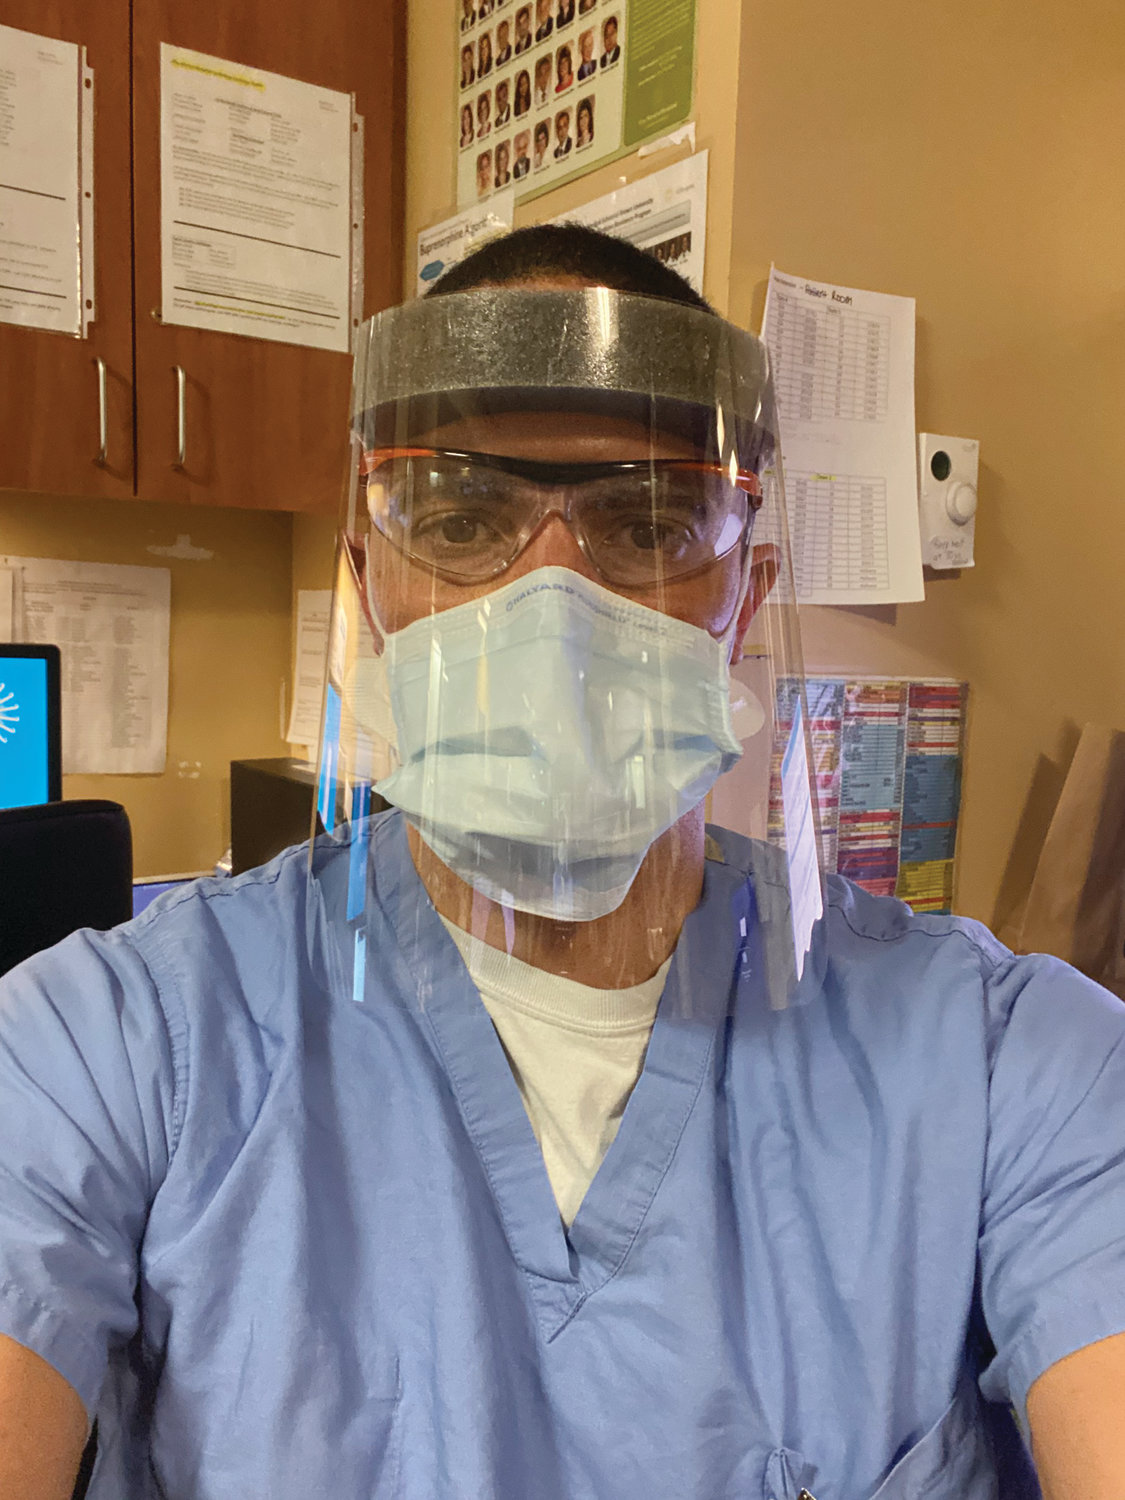 TAKING WORDS TO HEART:  Dr. Luke Messac, seen here geared up for work at Rhode Island Hospital, recently shared a 13-year-old email response from NIH Director Dr. Anthony Fauci. Fauci praised Messac’s thesis and said he was confident he would go on to have a successful career. (Submitted photo courtesy Luke Messac)